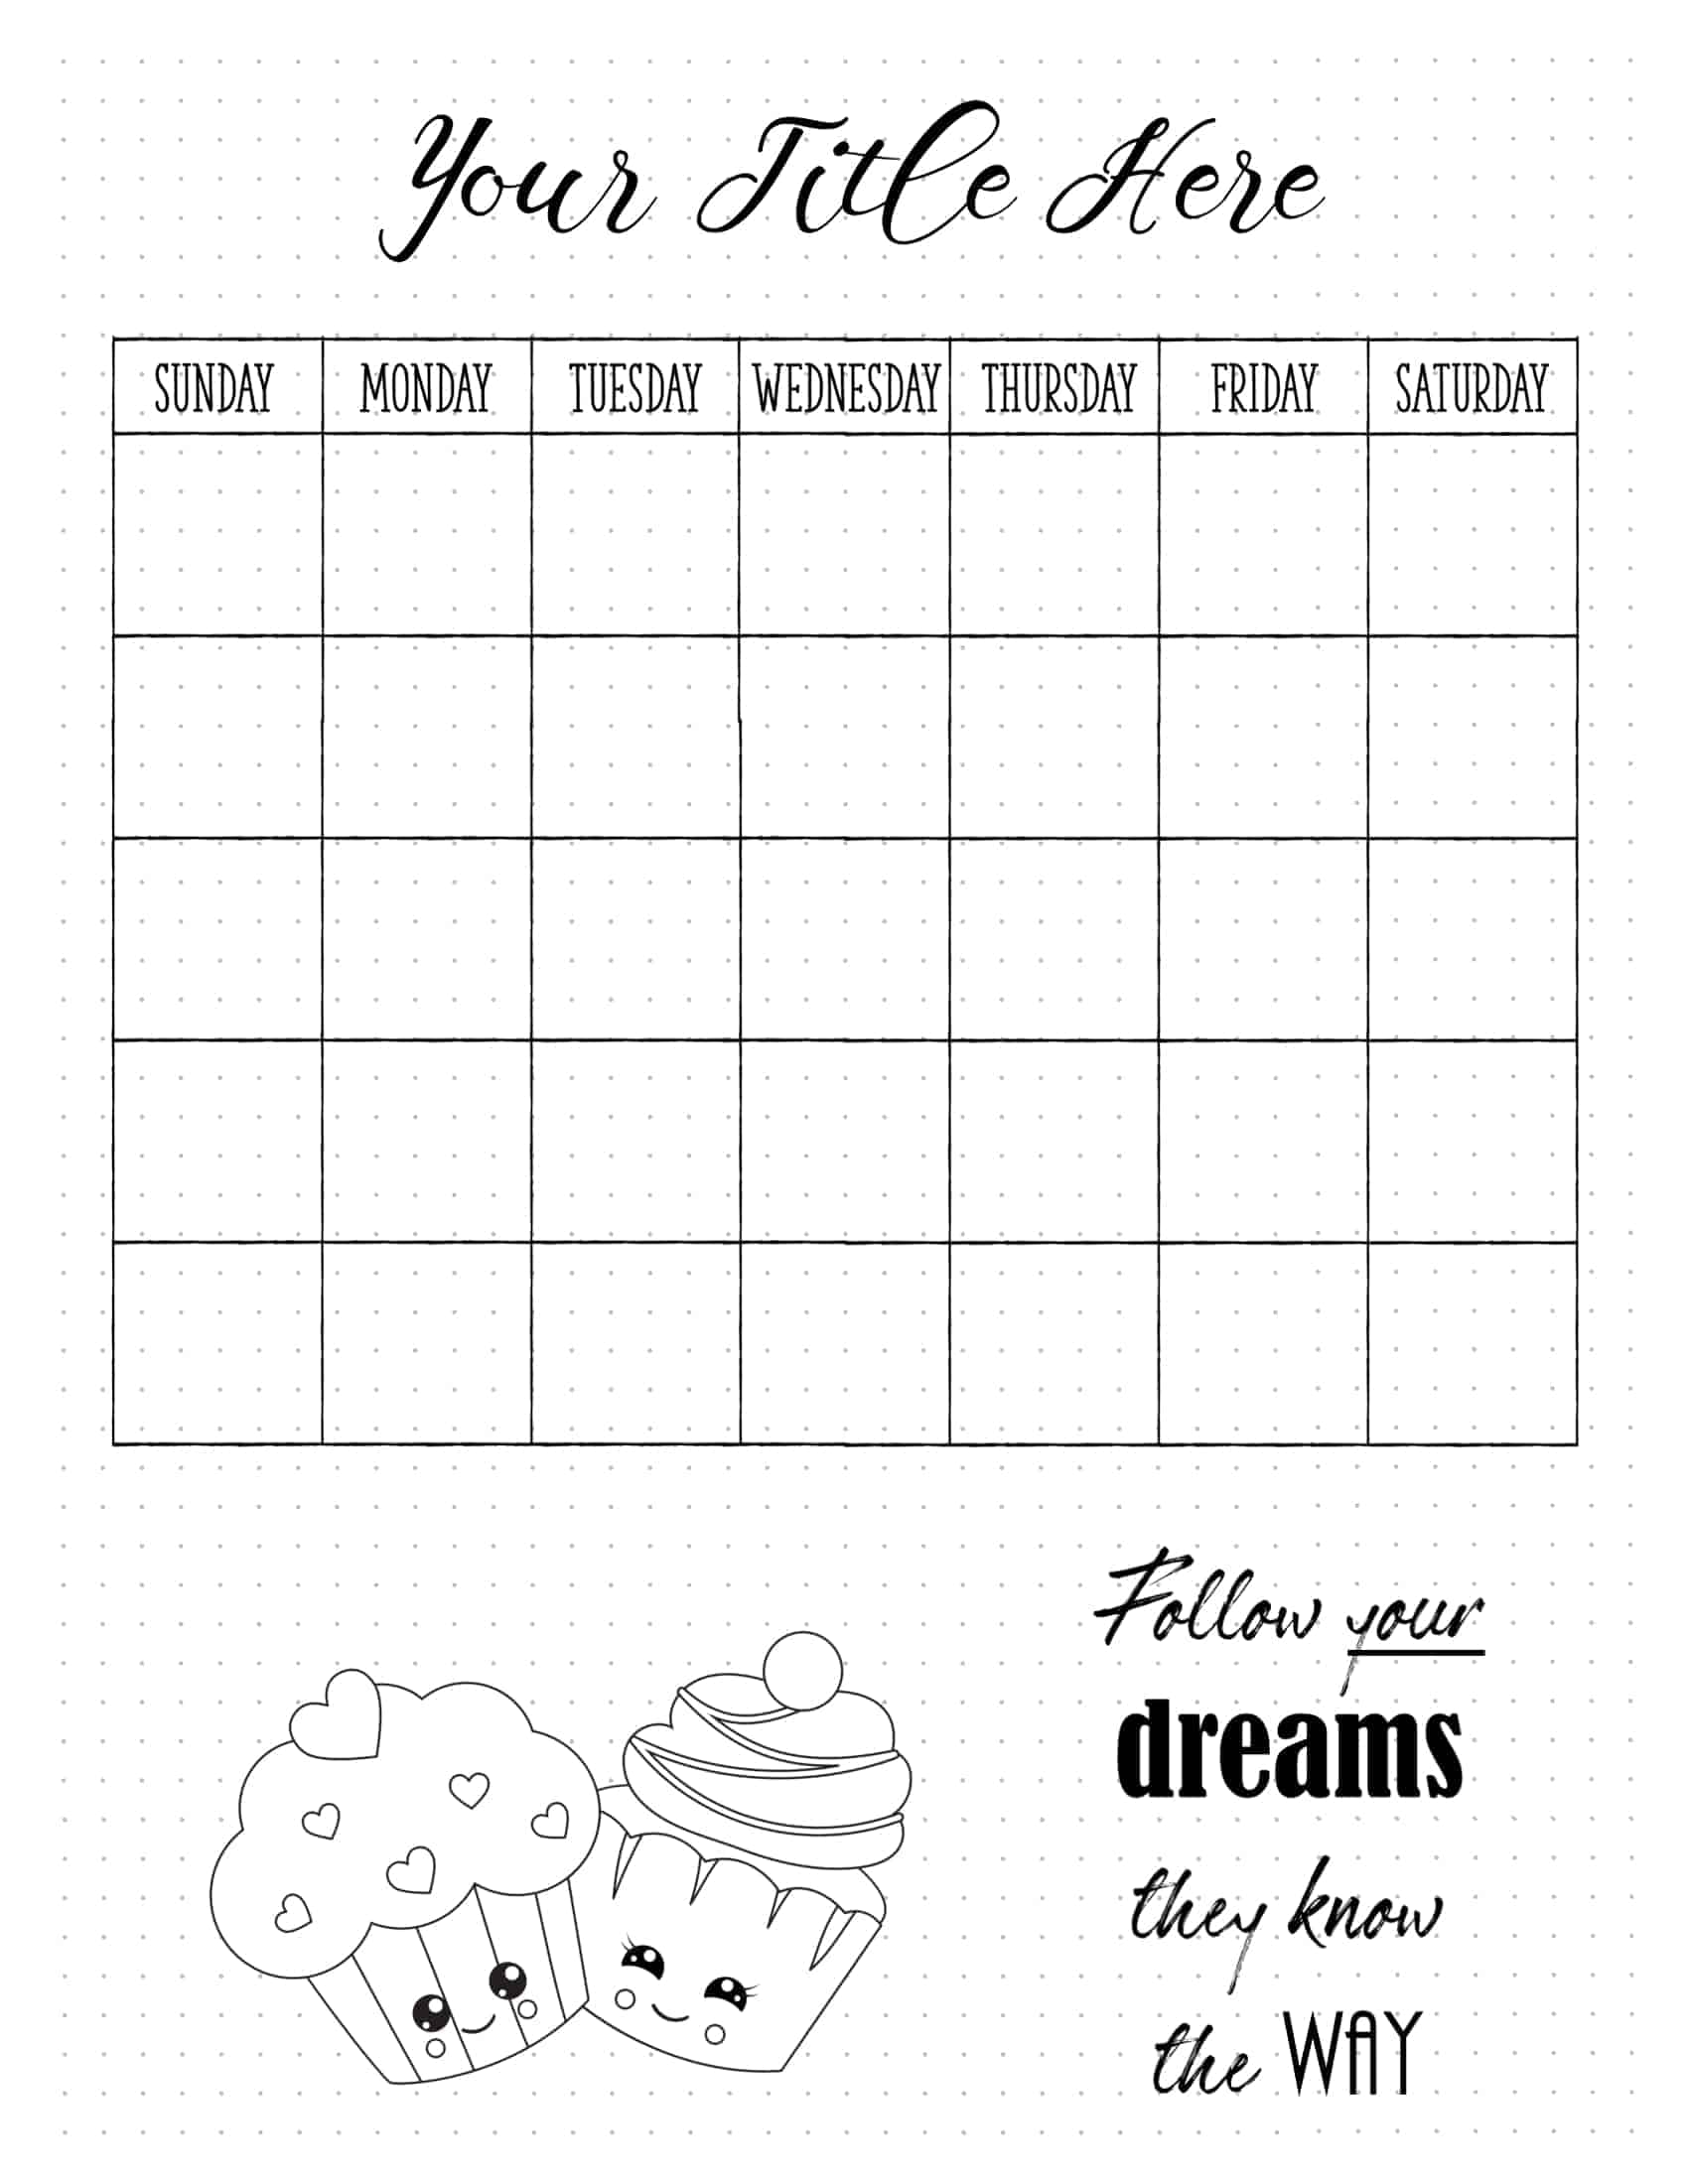 bullet-journal-calendar-free-customizable-printable-how-to-yearly-calendar-in-your-bullet